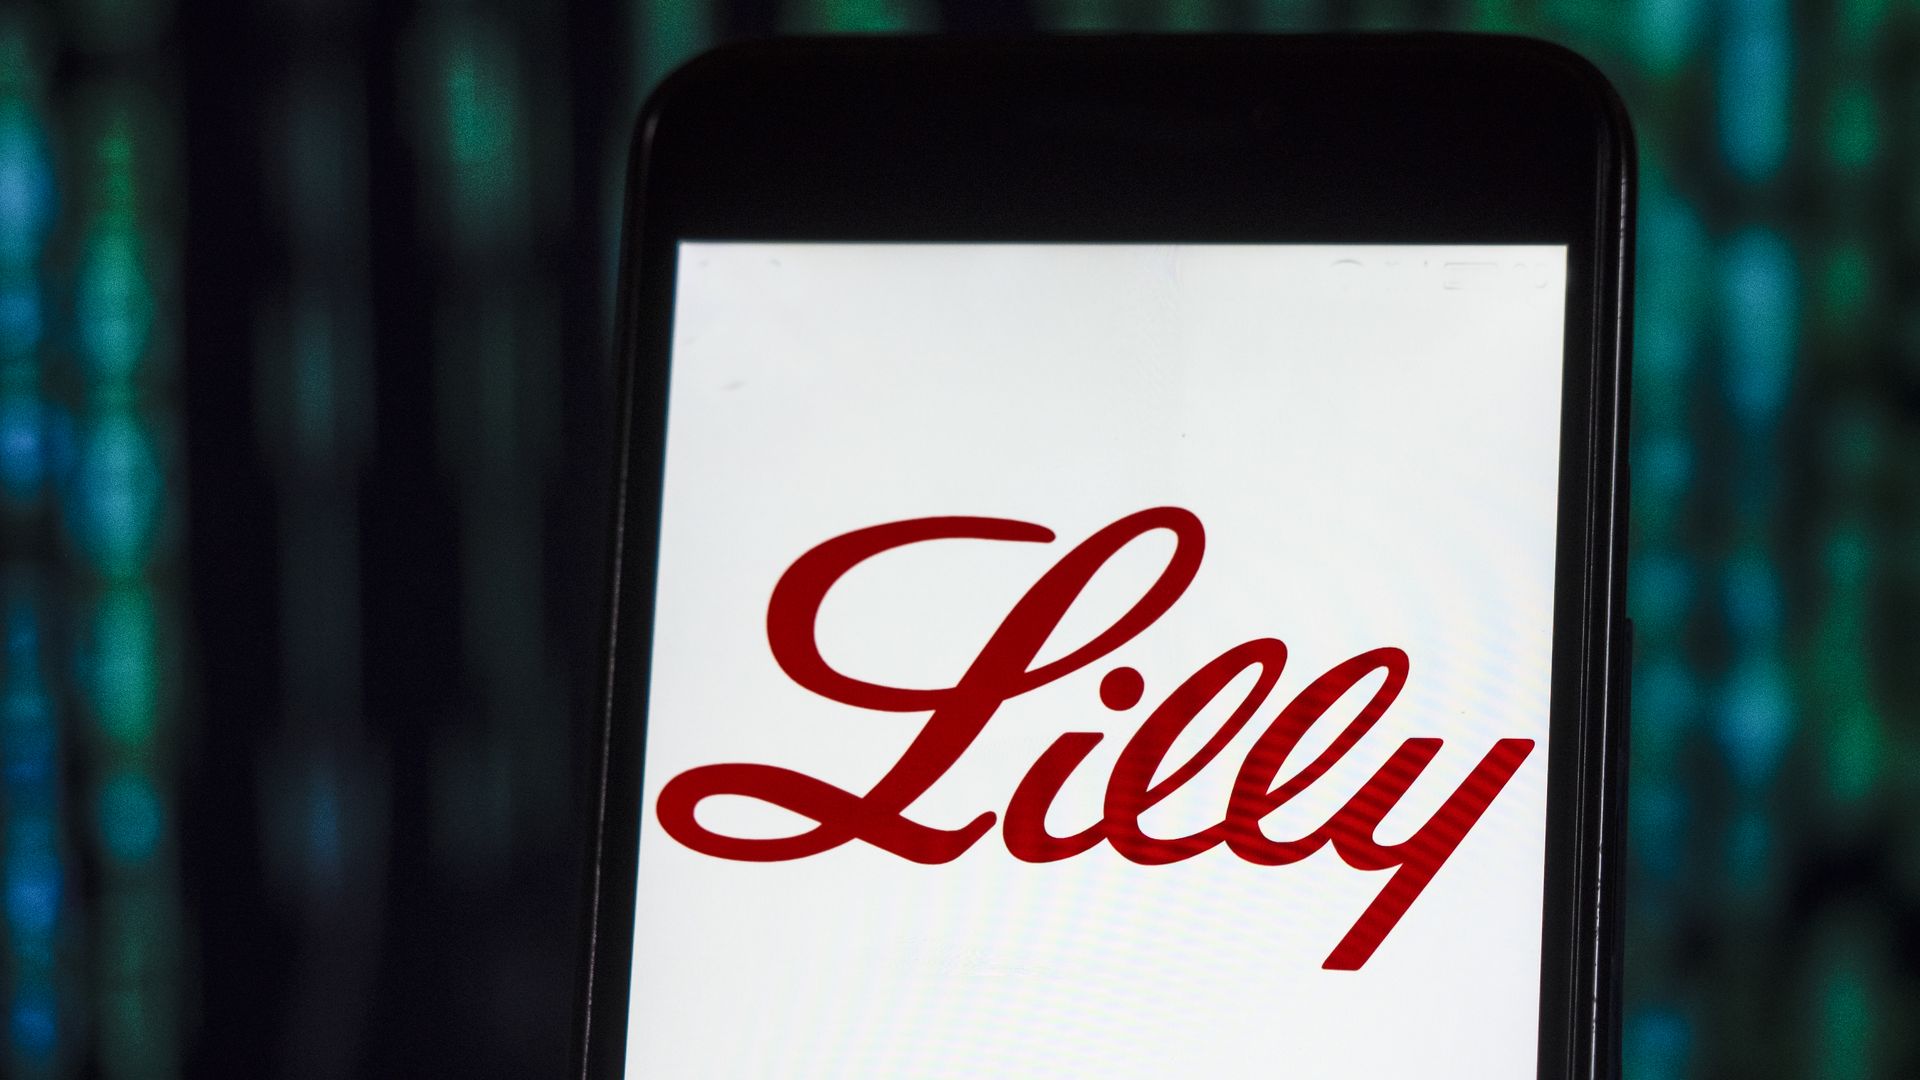 A phone with the Eli Lilly logo on the screen.